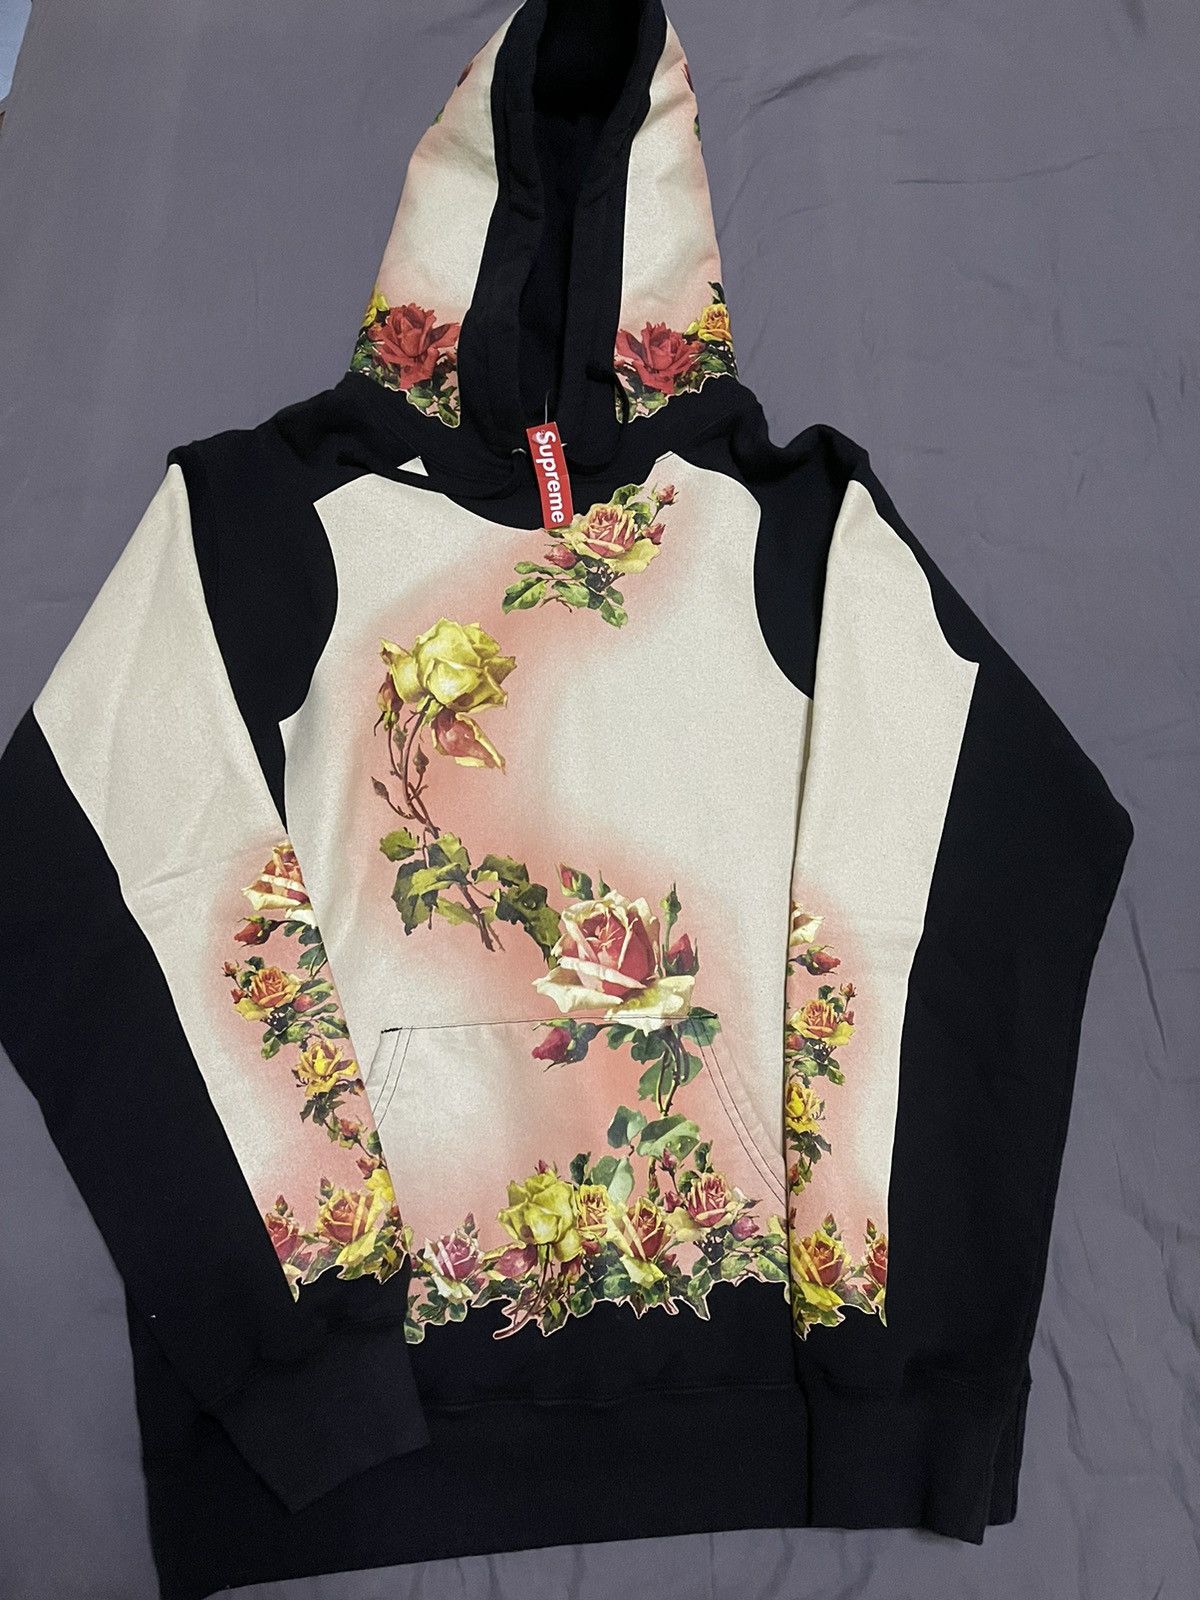 Supreme Supreme Jean Paul gaultier Floral print hooded sweatershirts |  Grailed